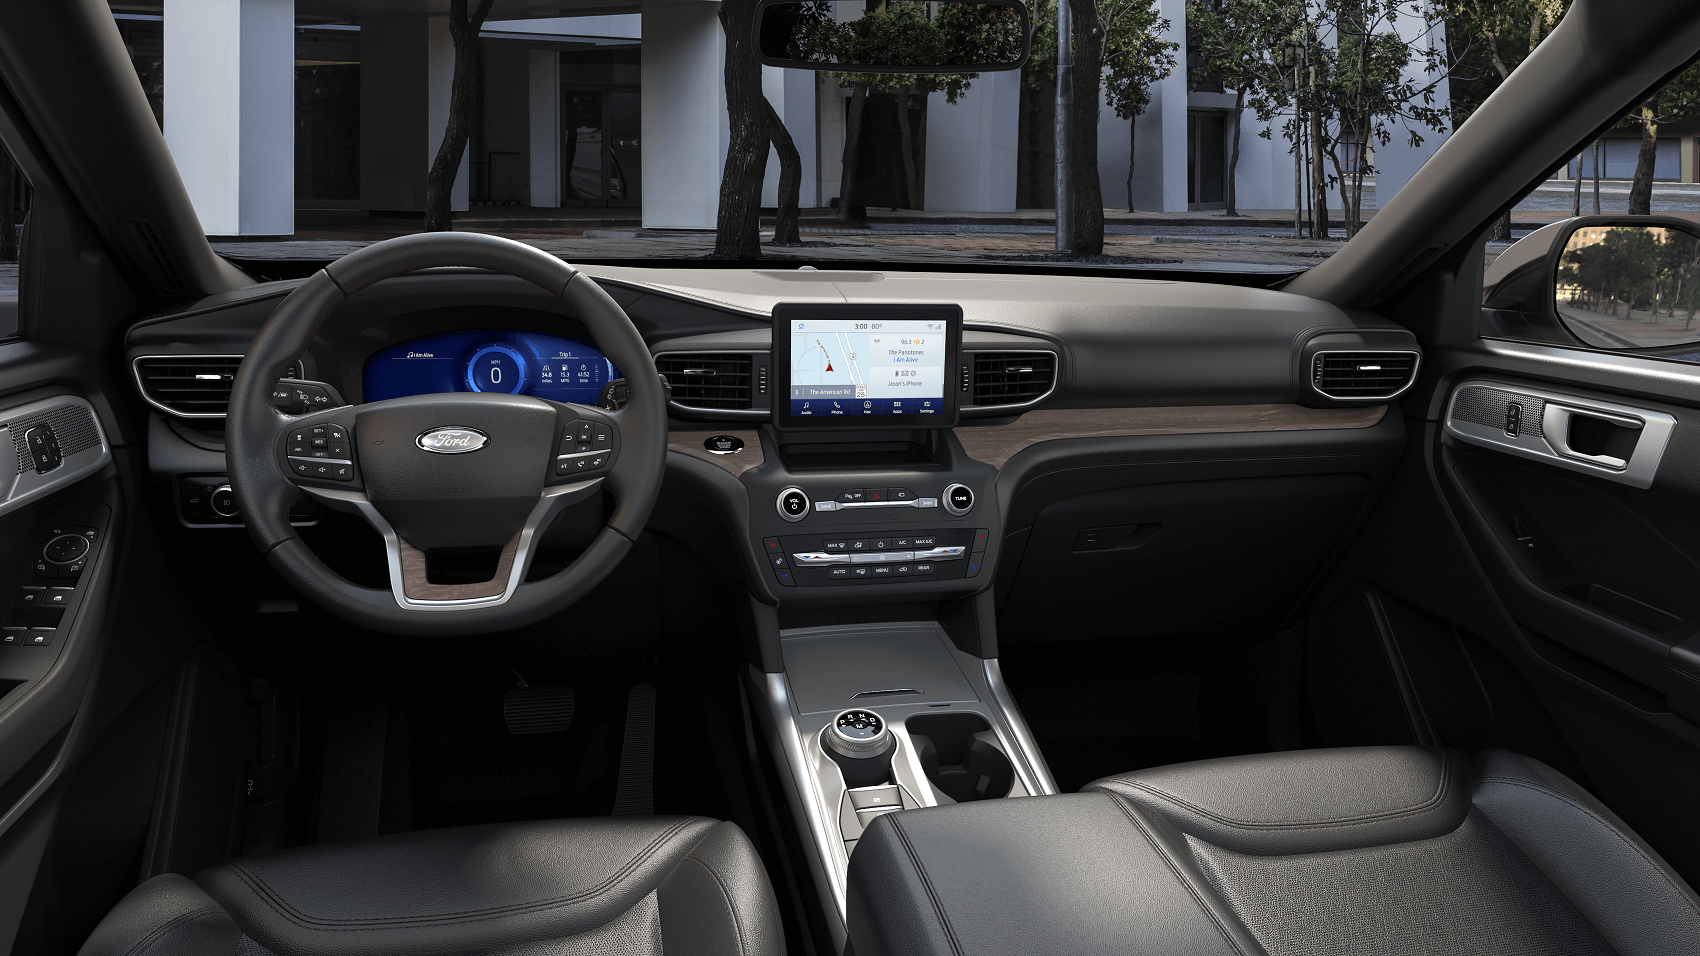 The interior dash of the 2021 Ford Explorer.